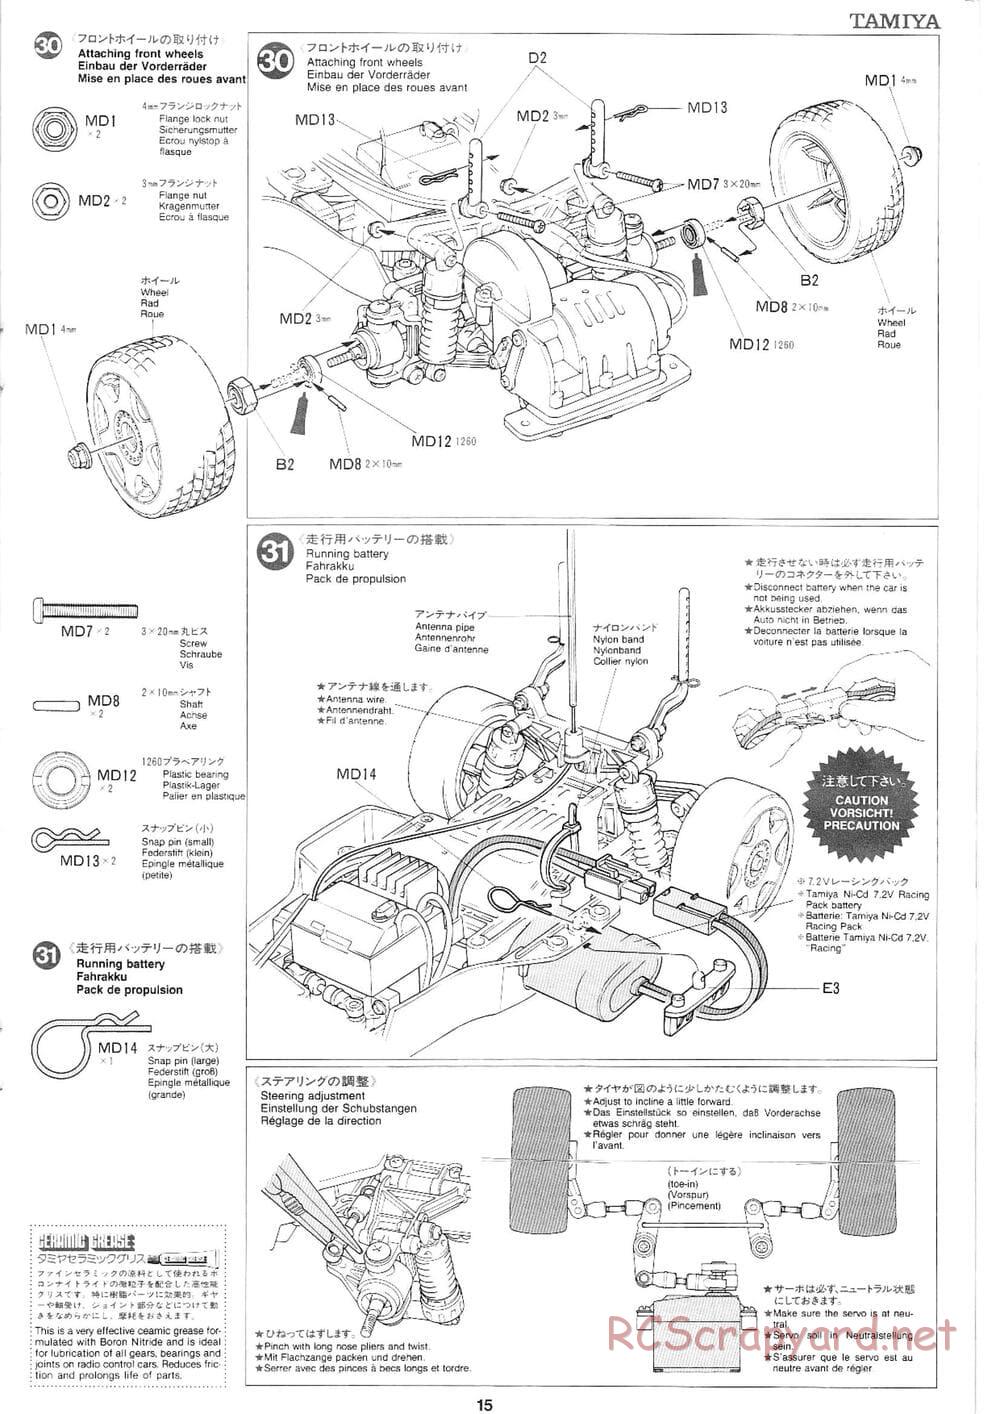 Tamiya - Volkswagen New Beetle - FF-01 Chassis - Manual - Page 13